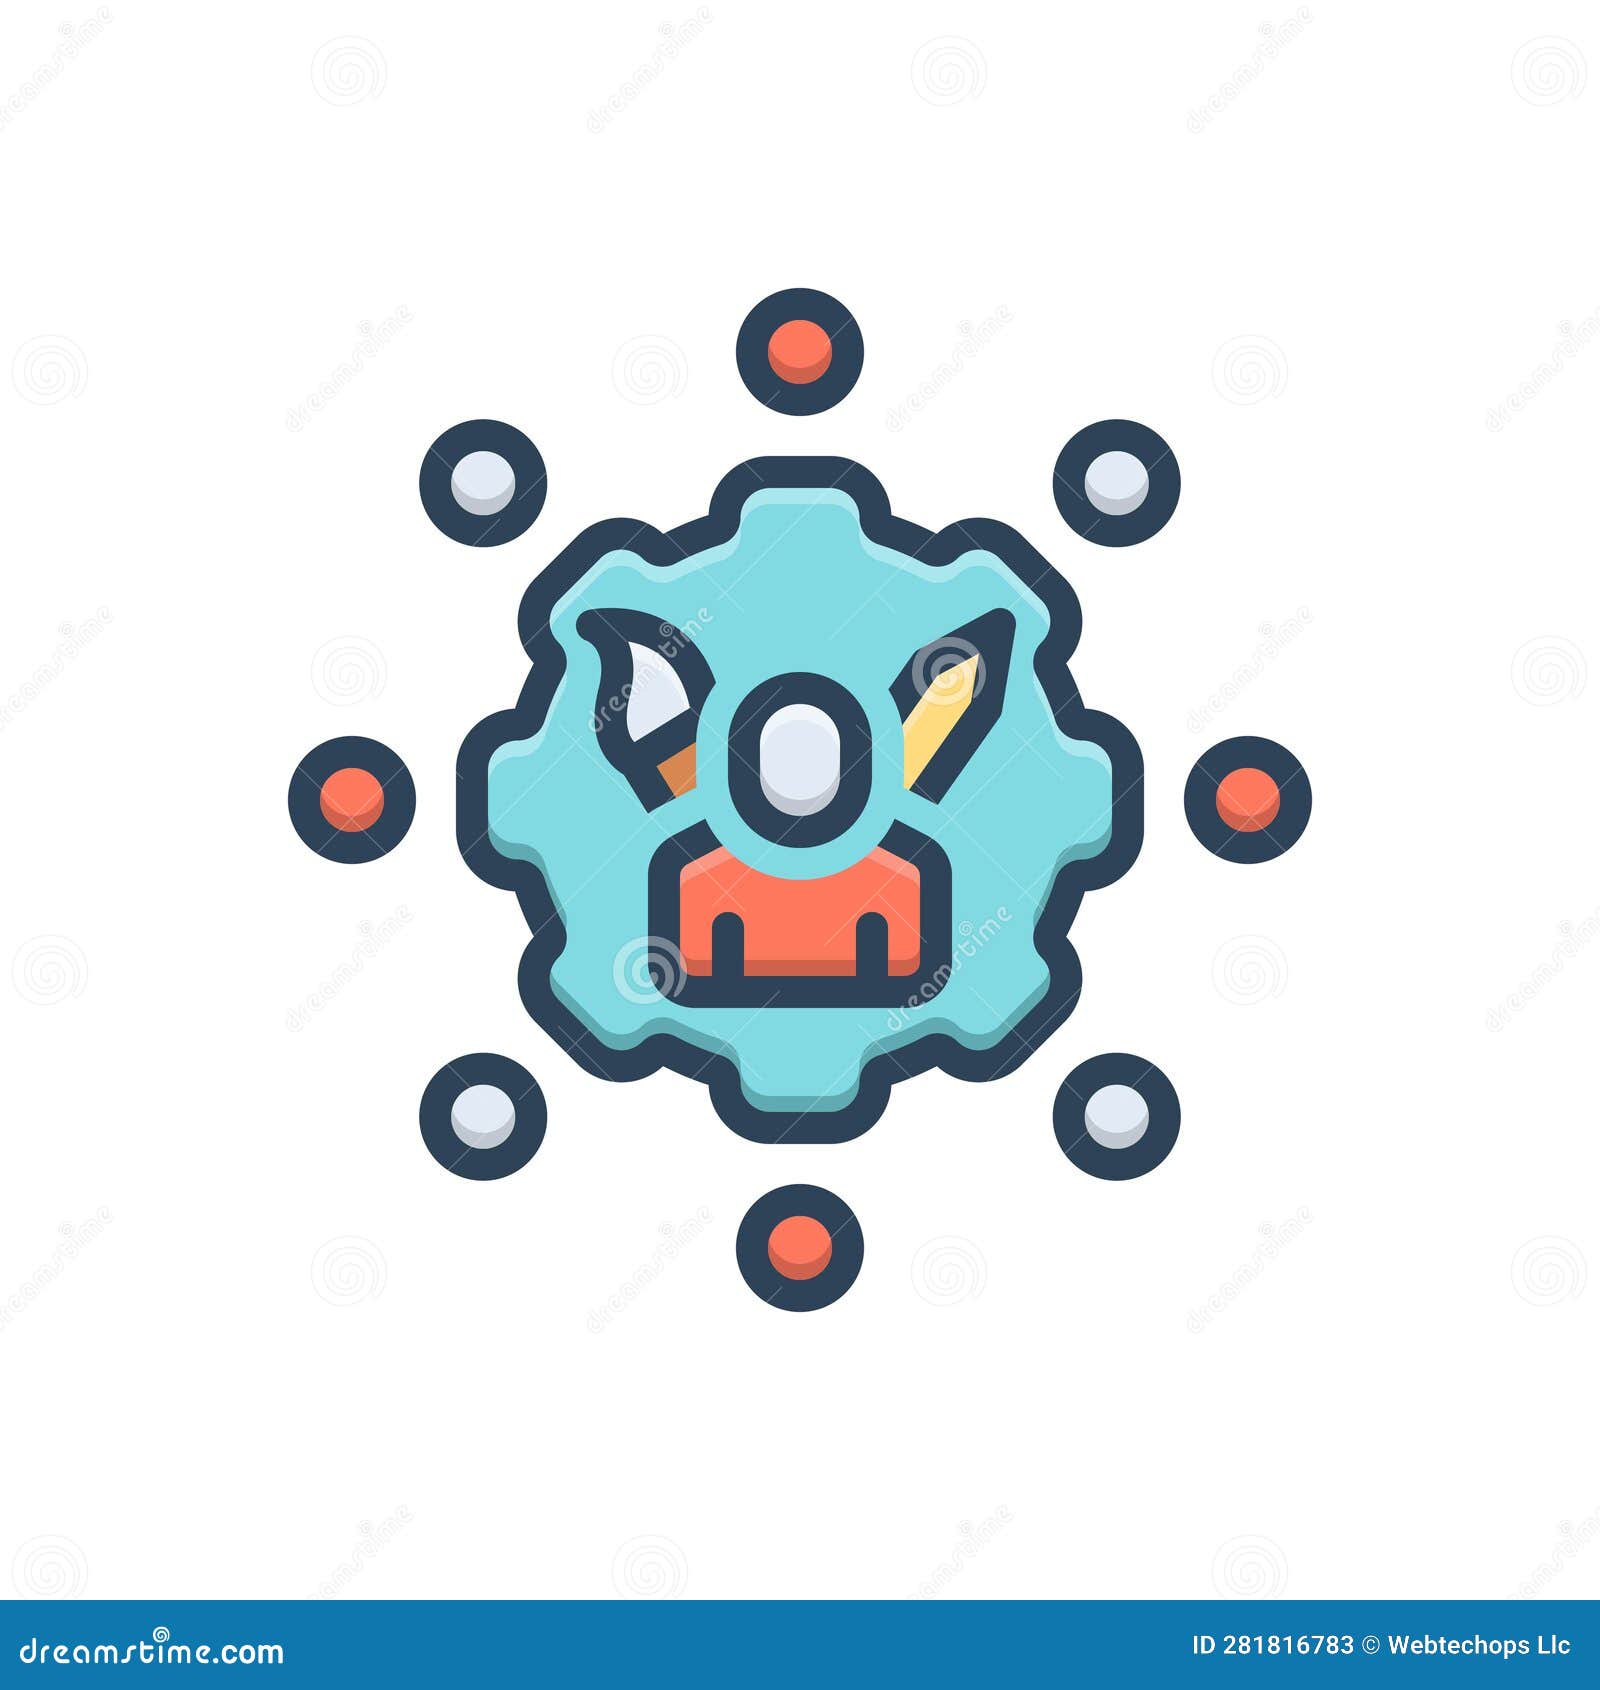 color  icon for skills, dexterity and talent